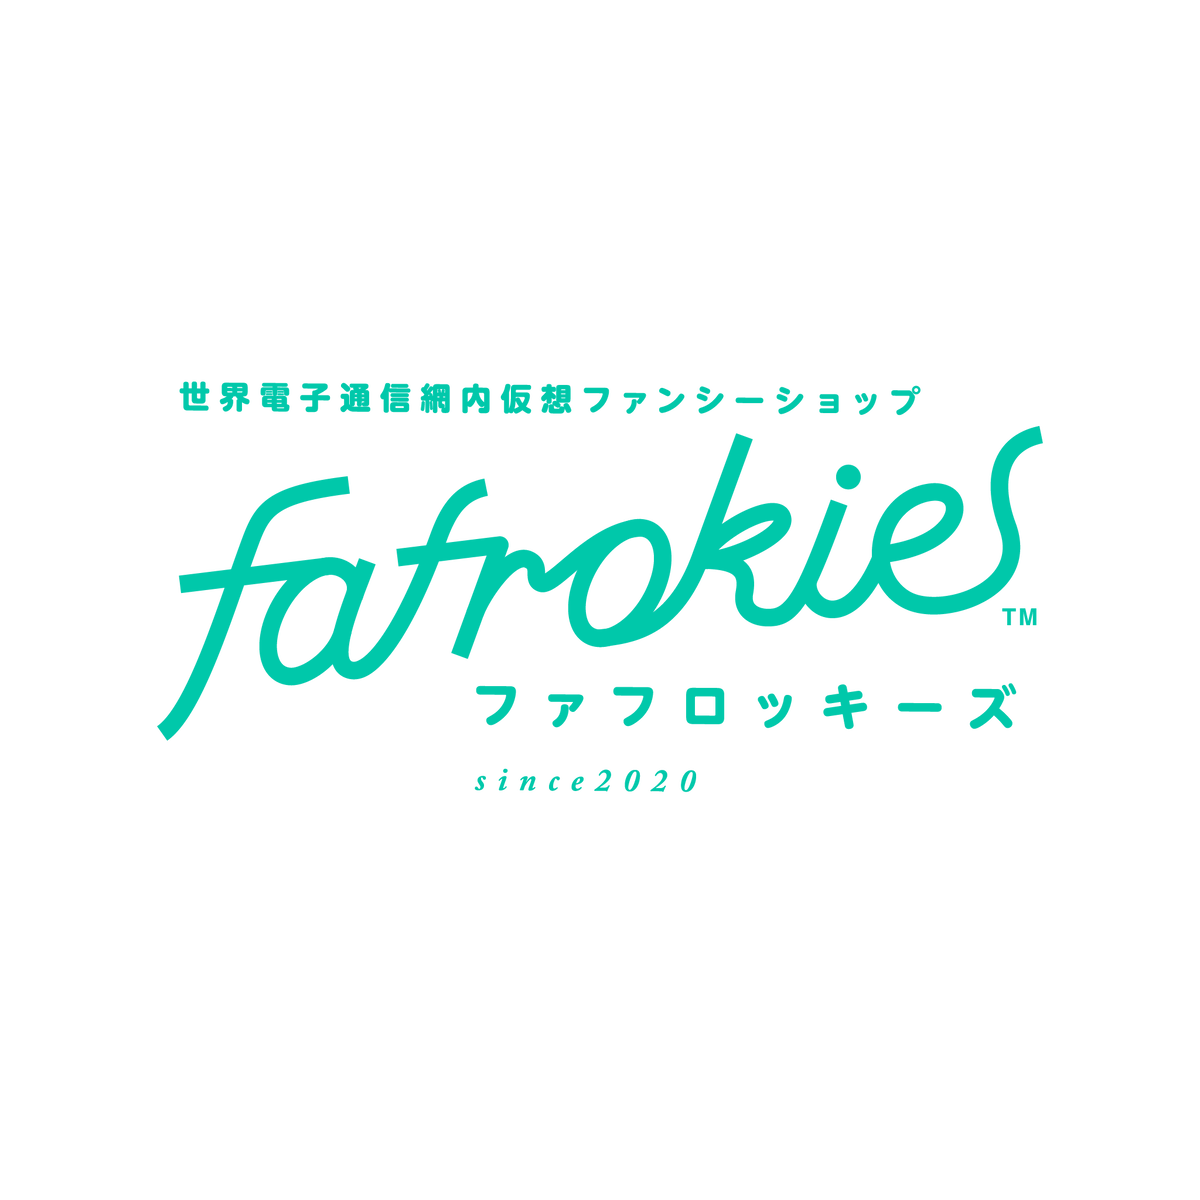 About Fafrokies